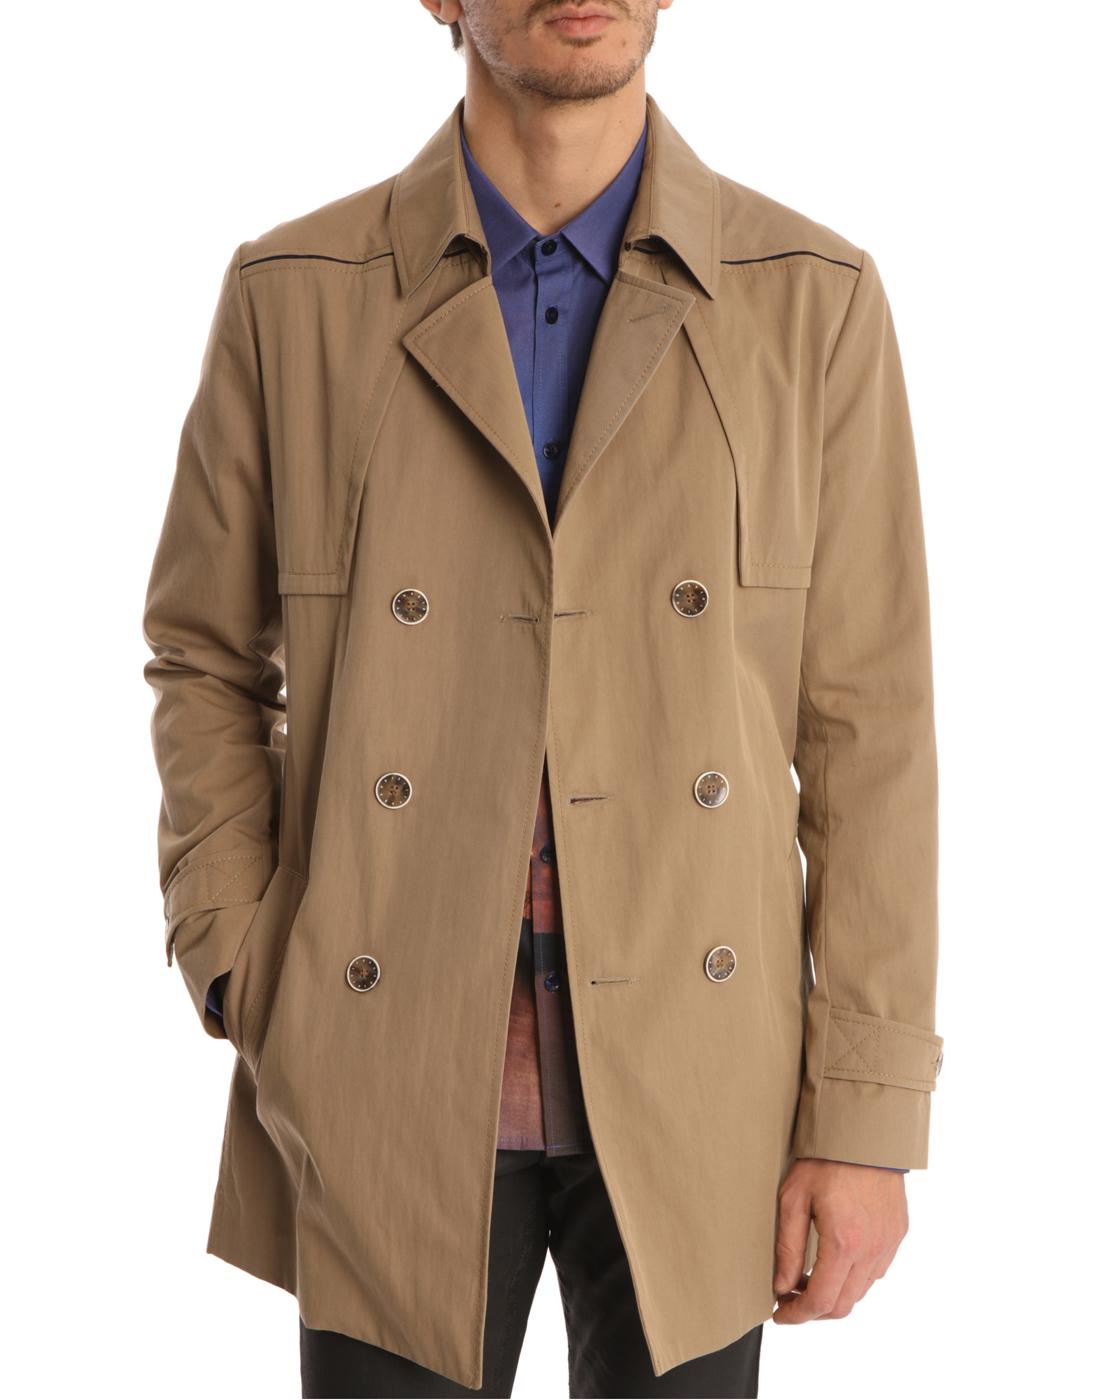 Foto Trench beige Gary con cinturón impermeable foto 516360